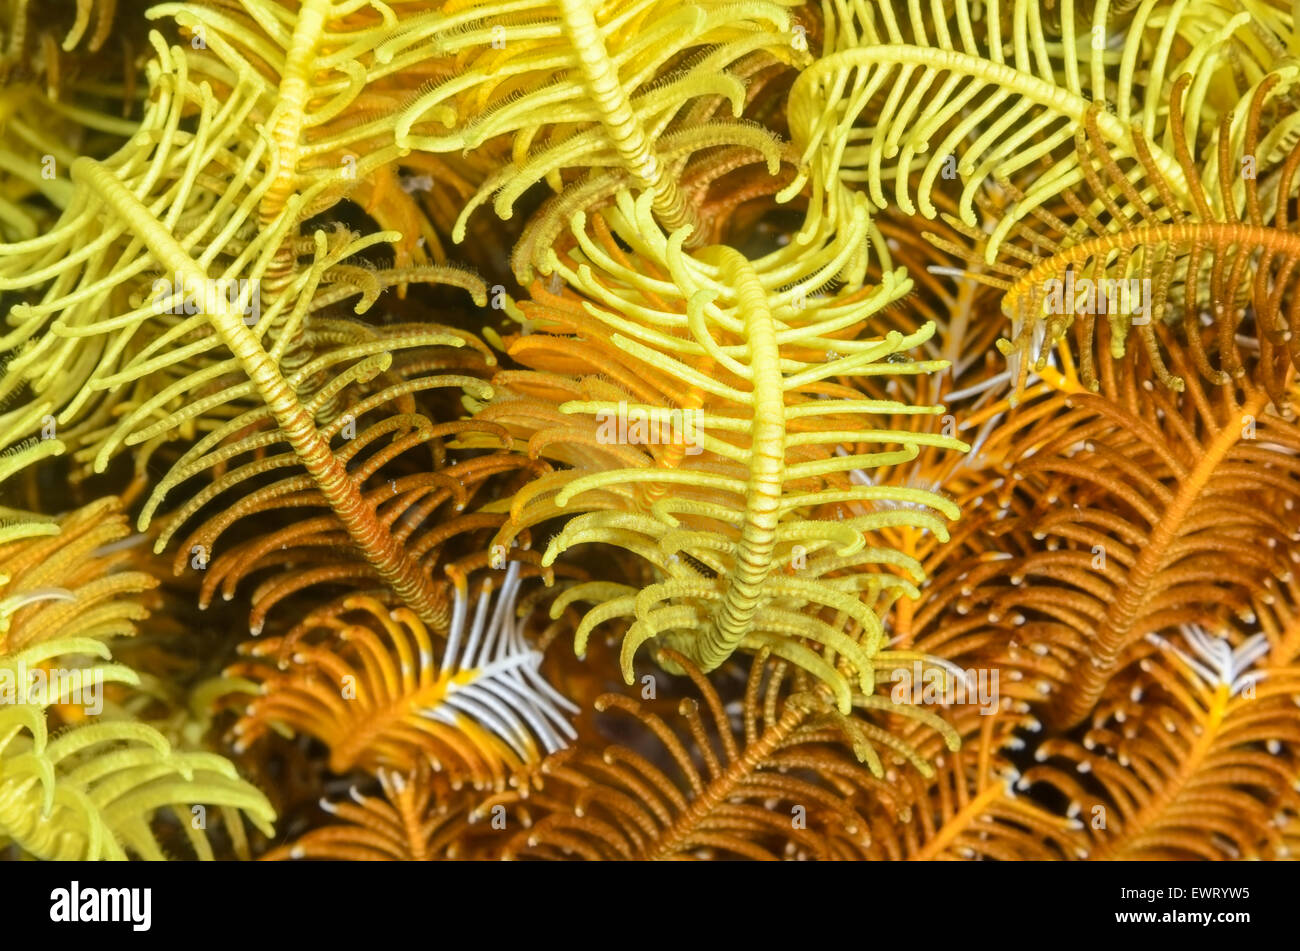 Feather star arms and cirri, Comaster schlegelii, Anilao, Batangas, Philippines, Pacific Stock Photo